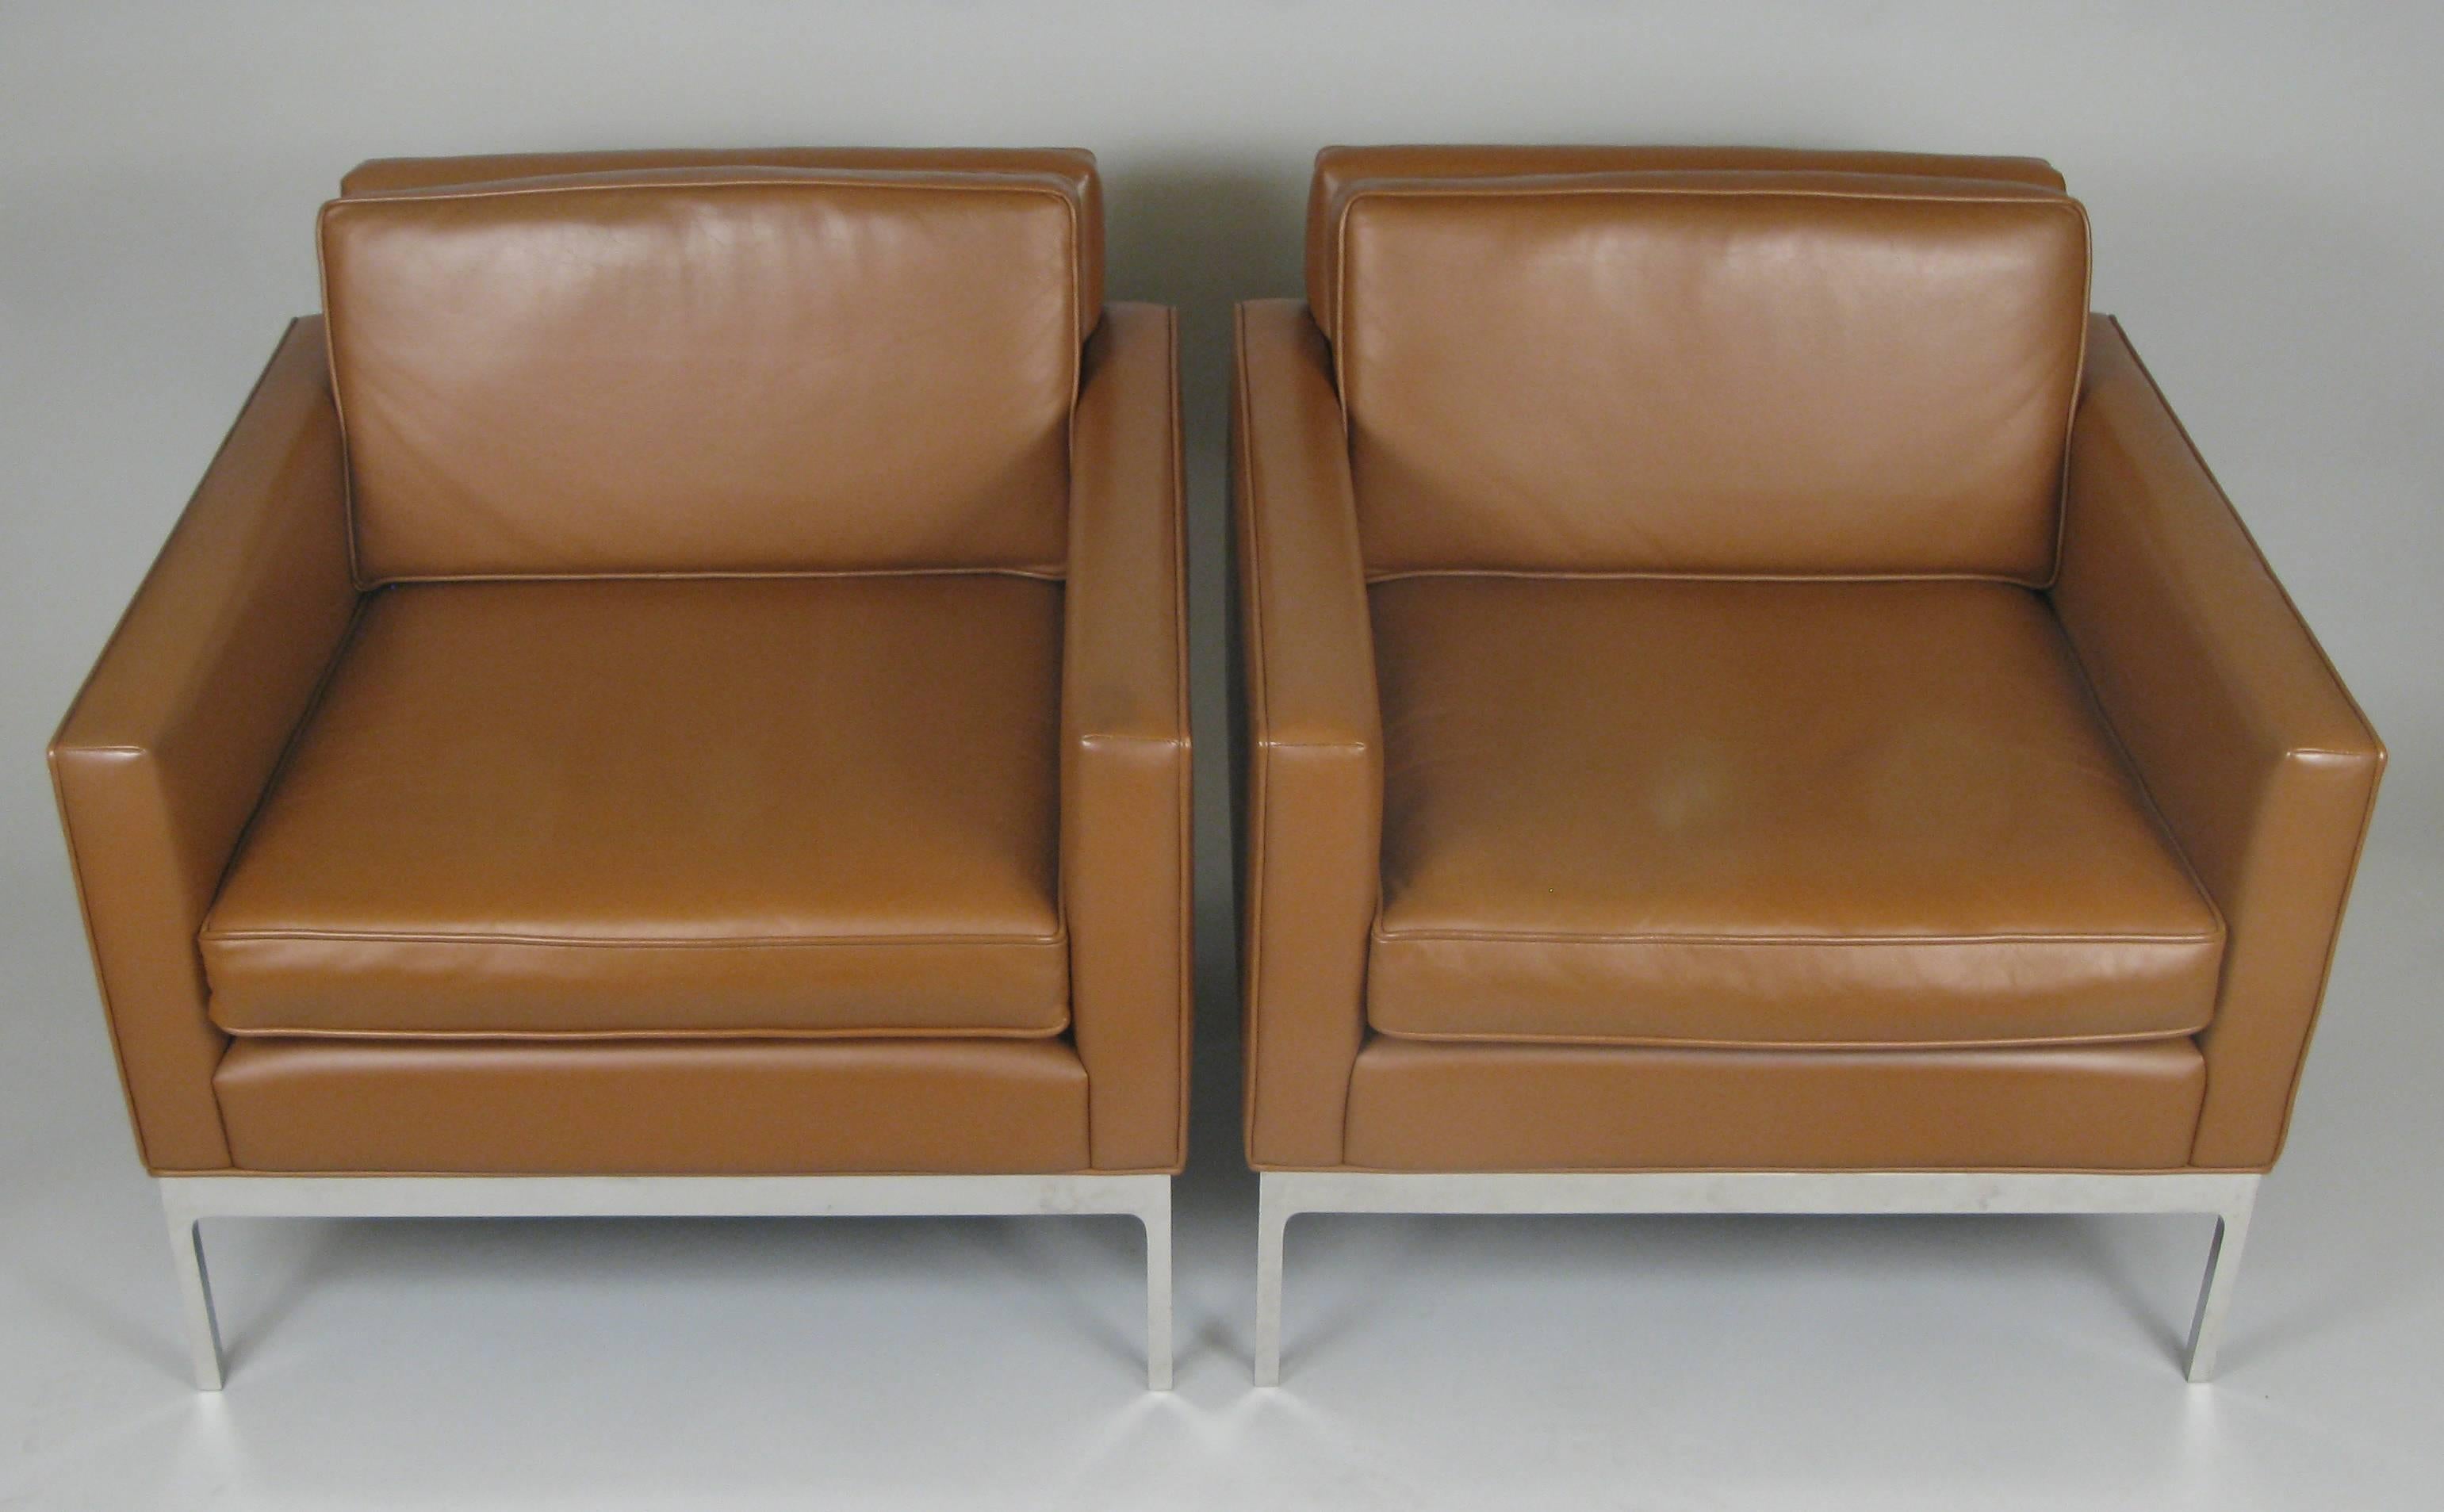 A beautiful matched pair of vintage 1970s 'Half-Arm' lounge chairs by Nicos Zographos, in their original caramel colored leather upholstery, with bases of seamless polished stainless steel. Classic and stylish, these are in excellent condition.